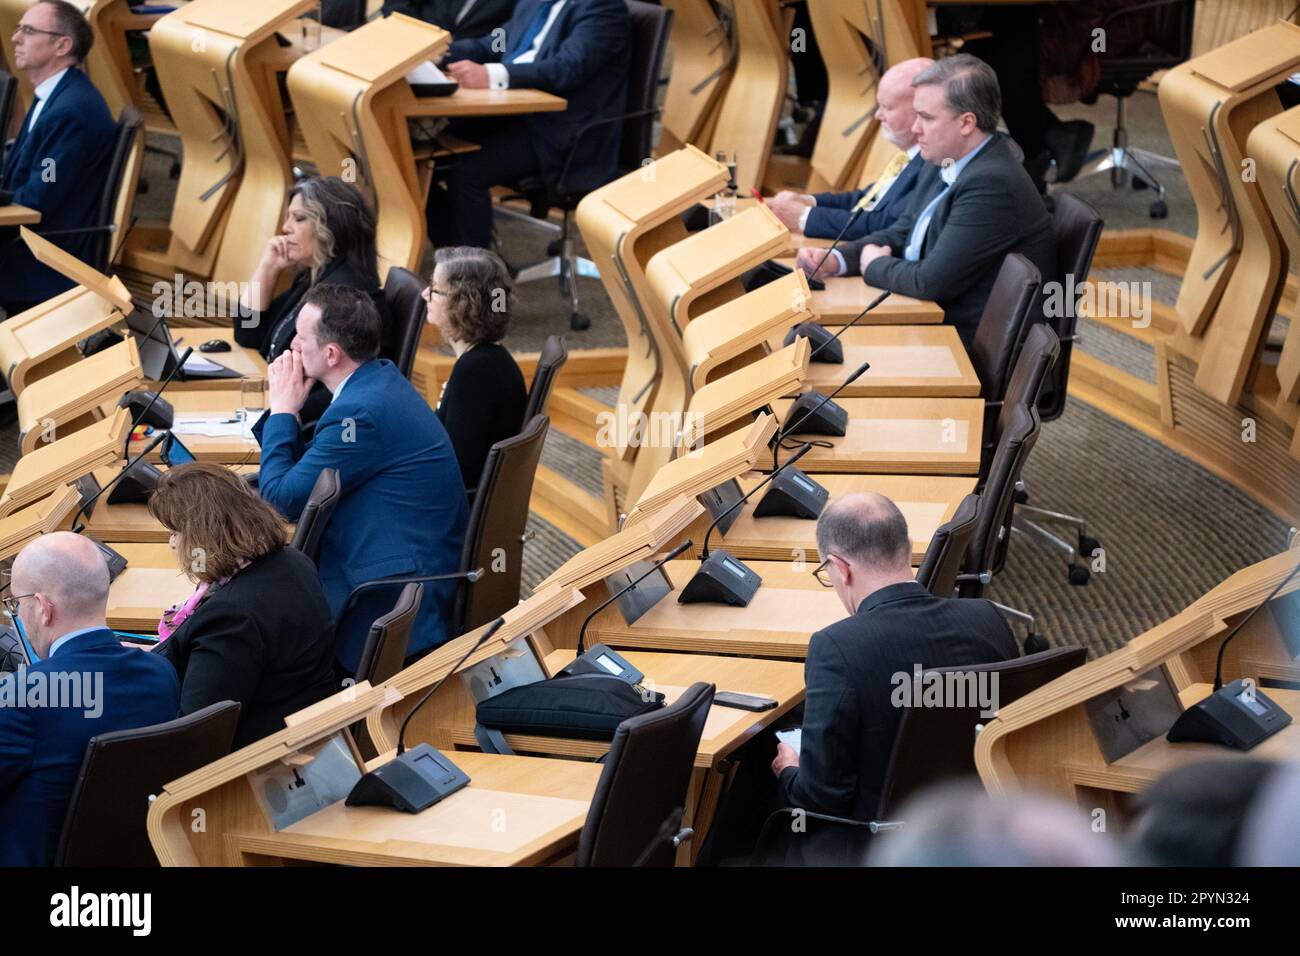 Edinburgh, Scotland, UK. 4th May, 2023. PICTURED: Lots of empty seats within the Scottish National Party (SNP) section in the chamber during FMQs today. Scenes inside Holyrood showing the corridor and chamber views of the MSPs at the weekly session of First Ministers Questions (FMQs). Credit: Colin D Fisher/CDFIMAGES.COM Credit: Colin Fisher/Alamy Live News Stock Photo